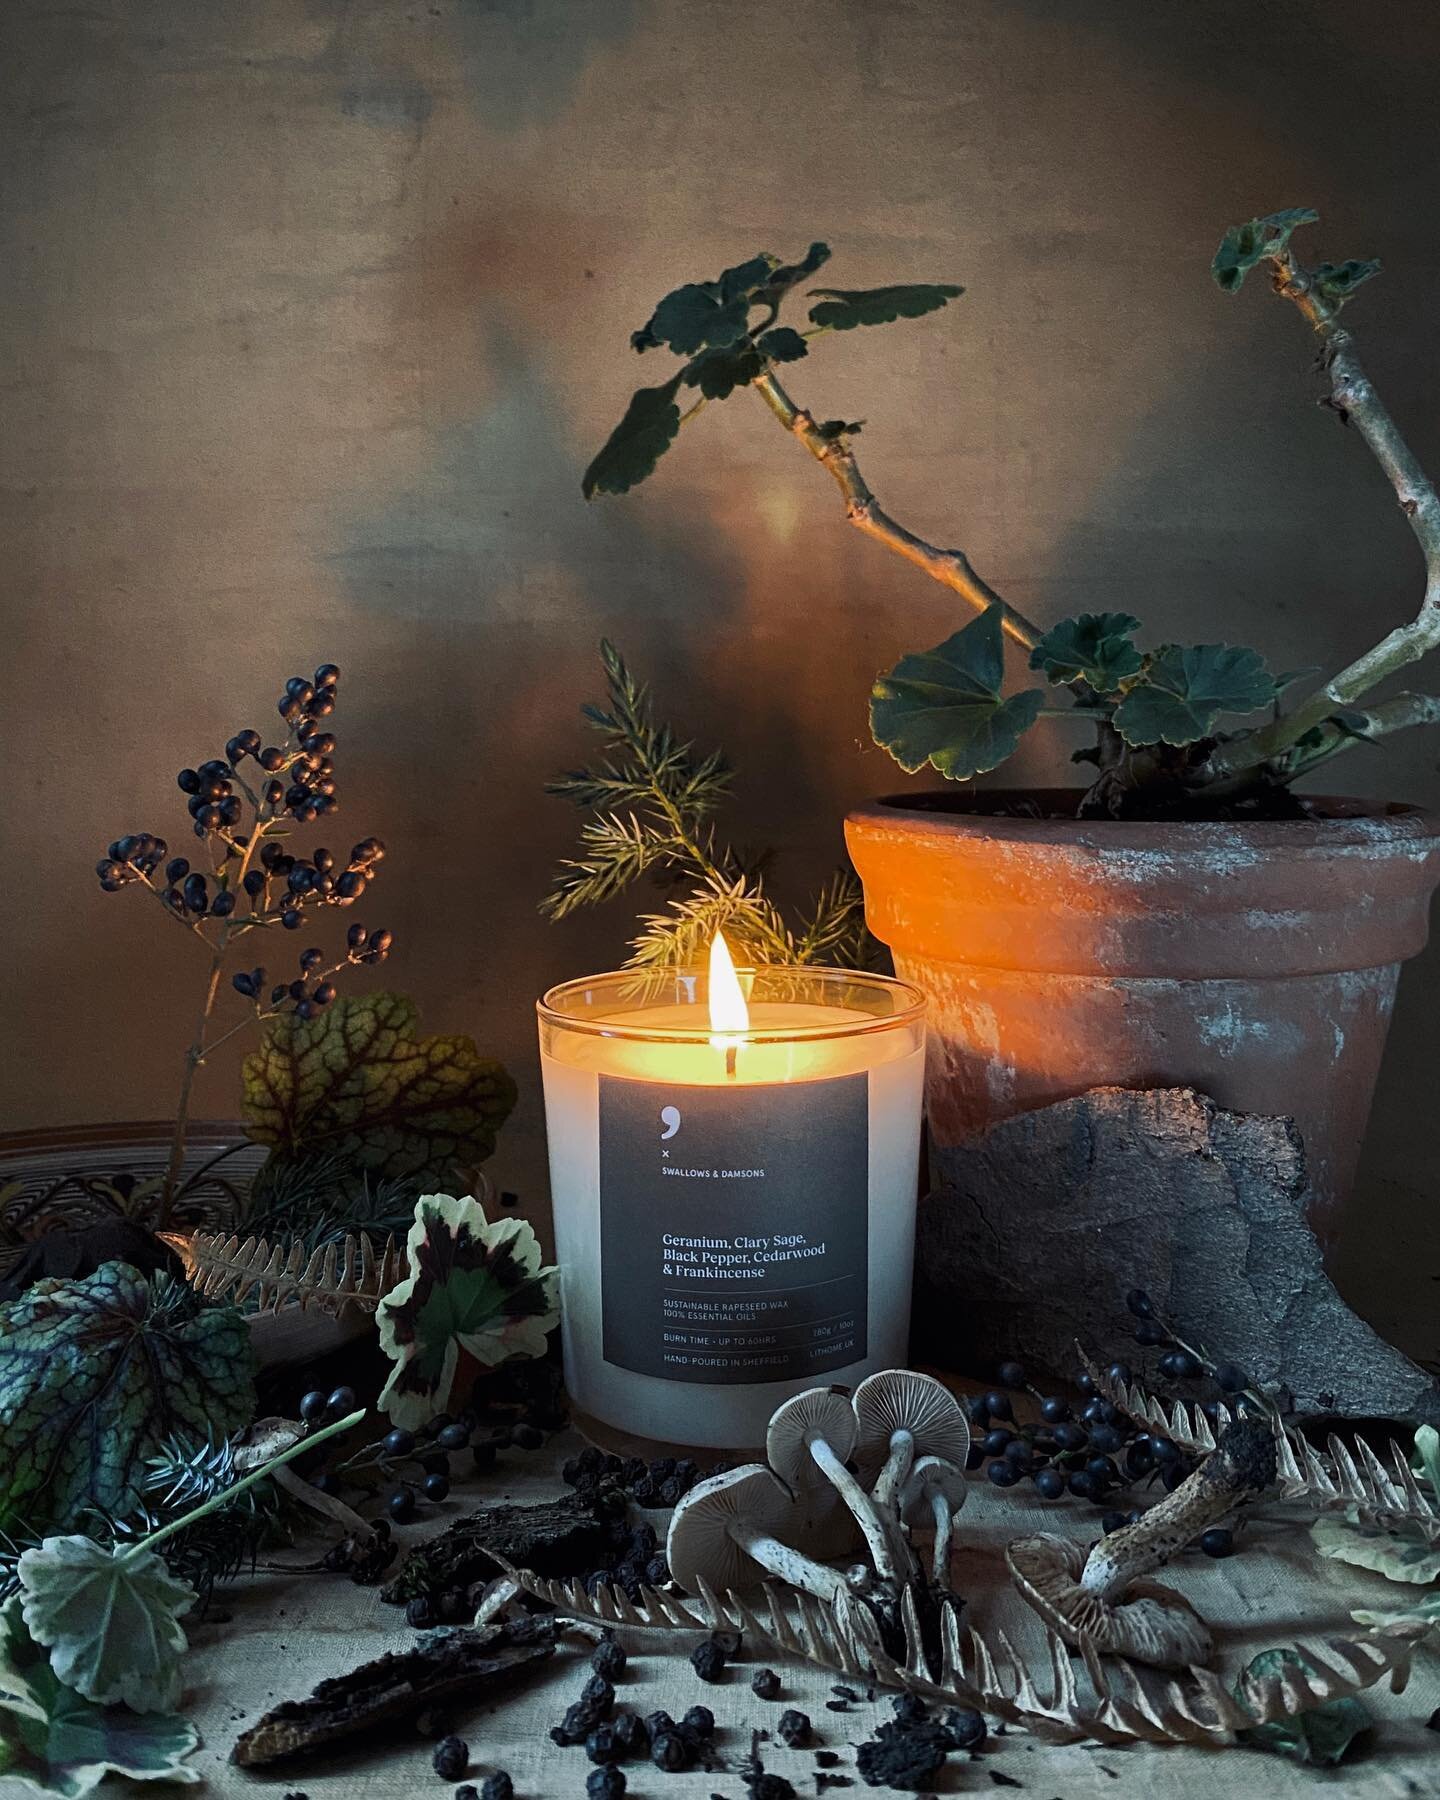 We are over the moon to share a project we have been working on this past year with the amazing @lithome.uk 

Introducing the Swallows &amp; Damsons scented candle. Features soft floral notes of clary sage and geranium, warming black pepper and a woo